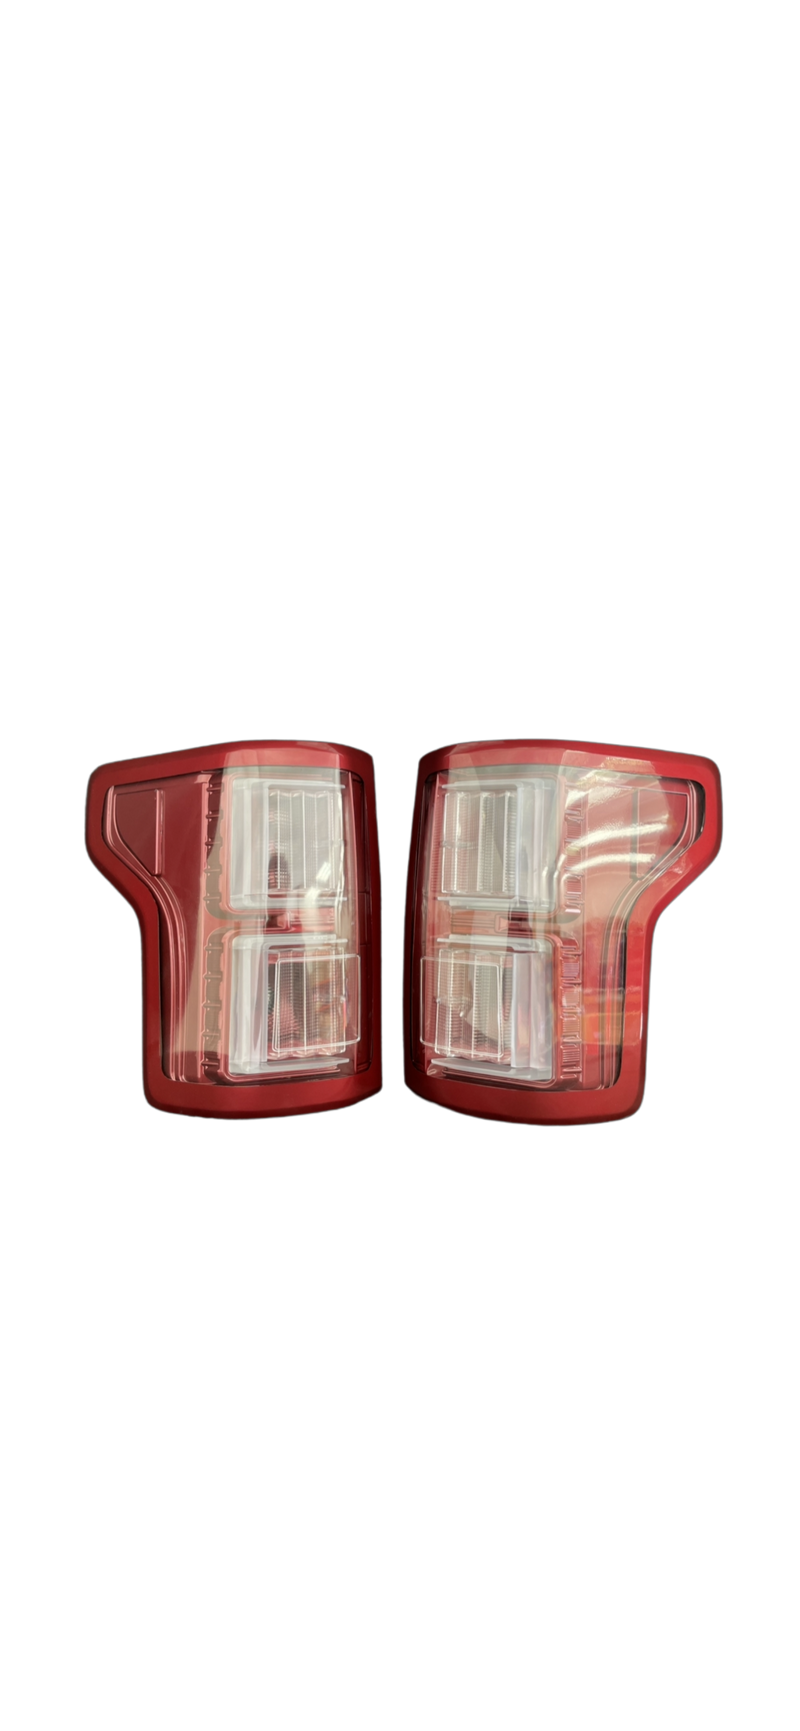 2018-2020 Ford F-150 Taillights - PRIMO DYNAMIC